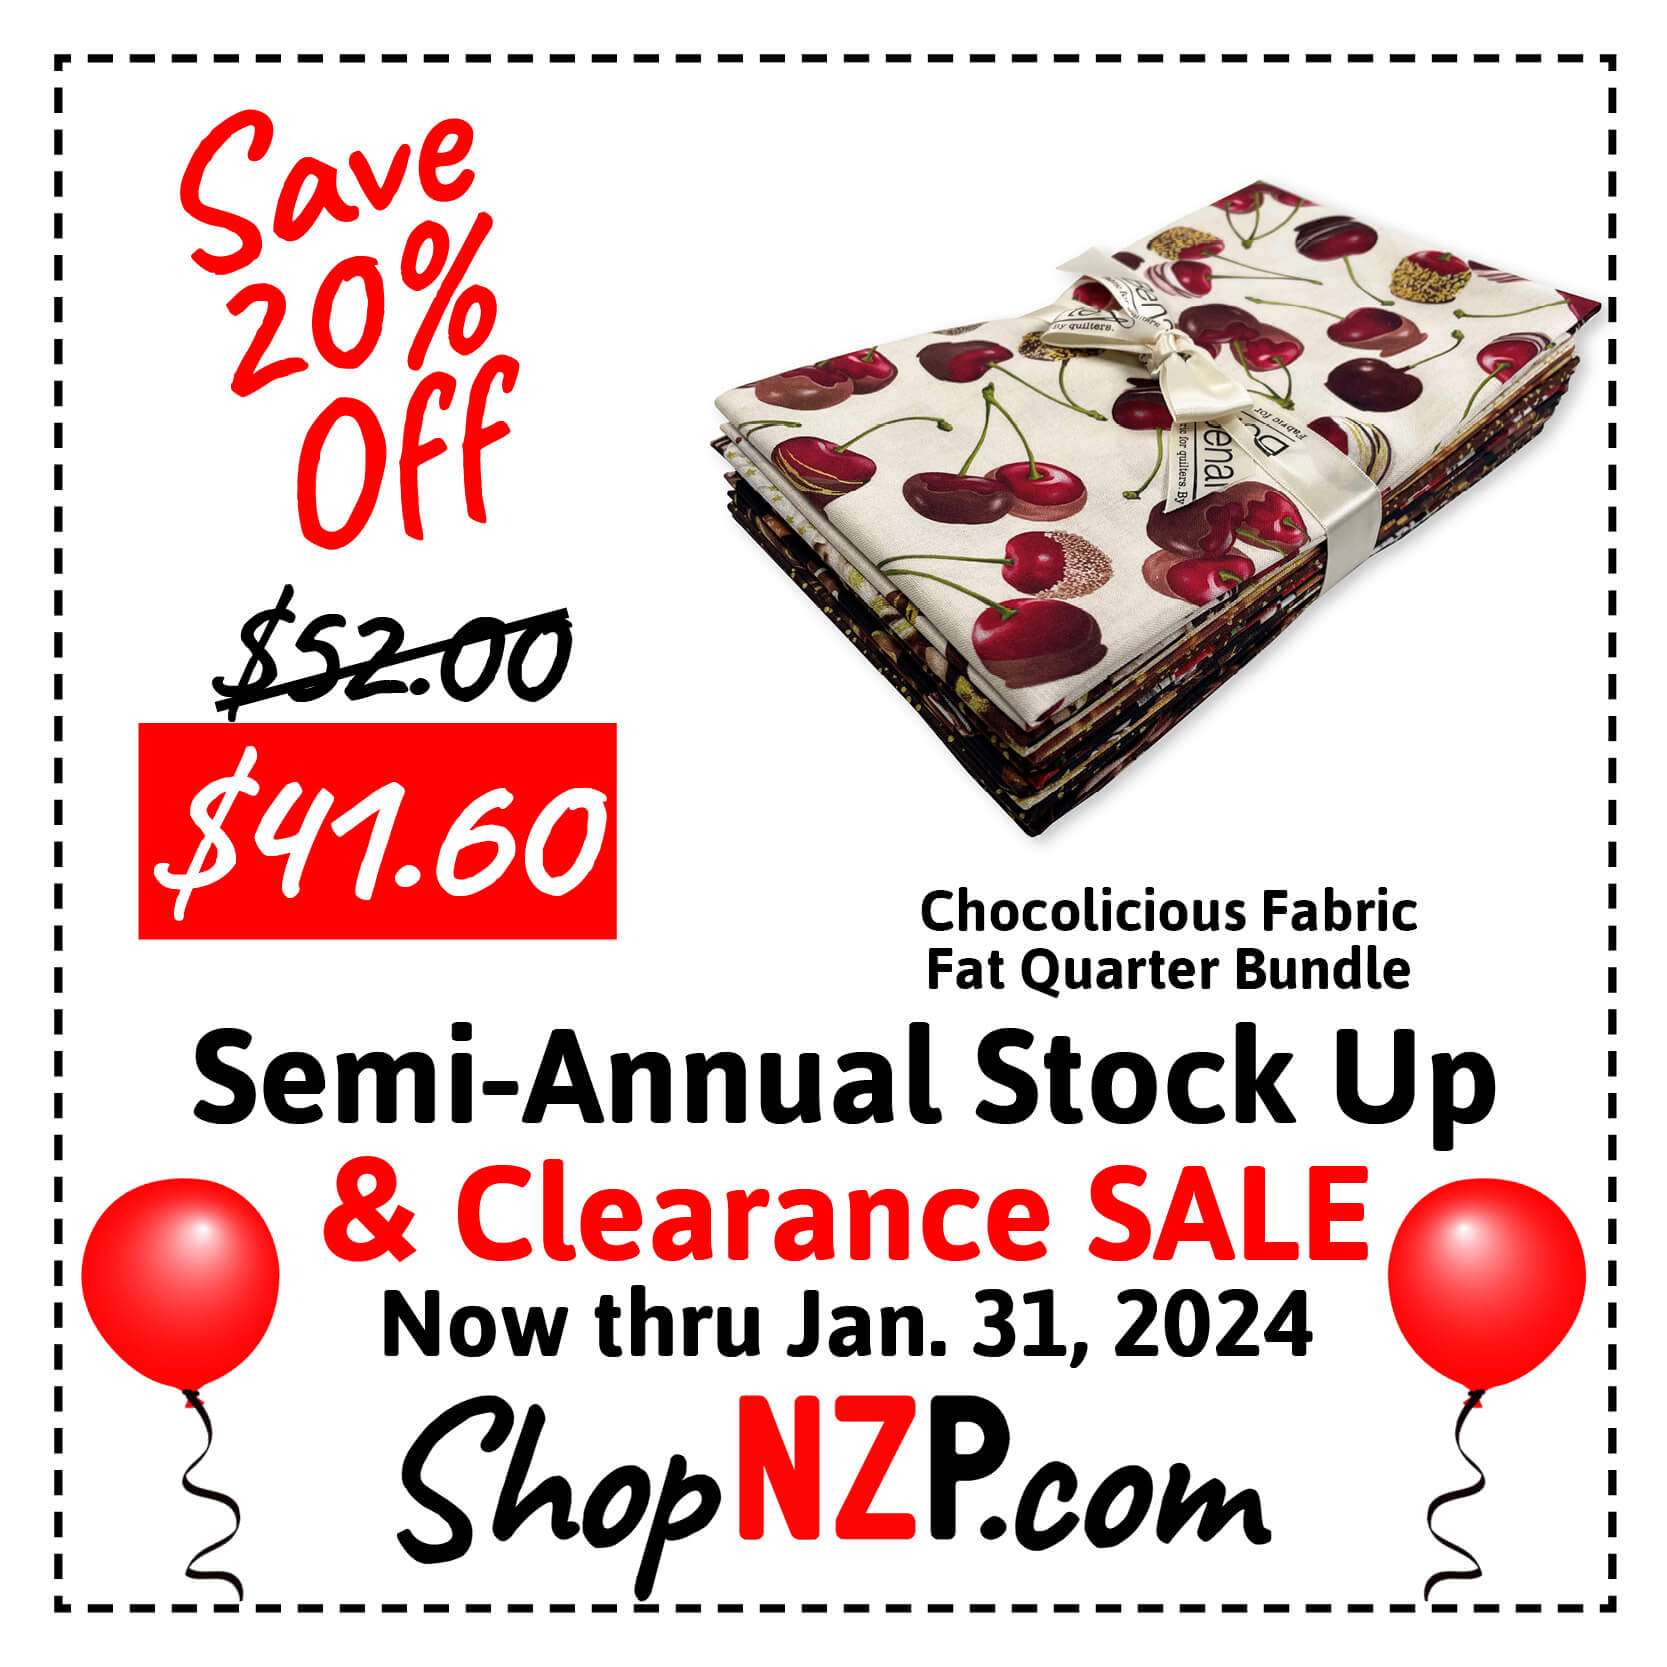 SEMI-ANNUAL CLEARANCE & STOCK UP SALE AT ShopNZP.com